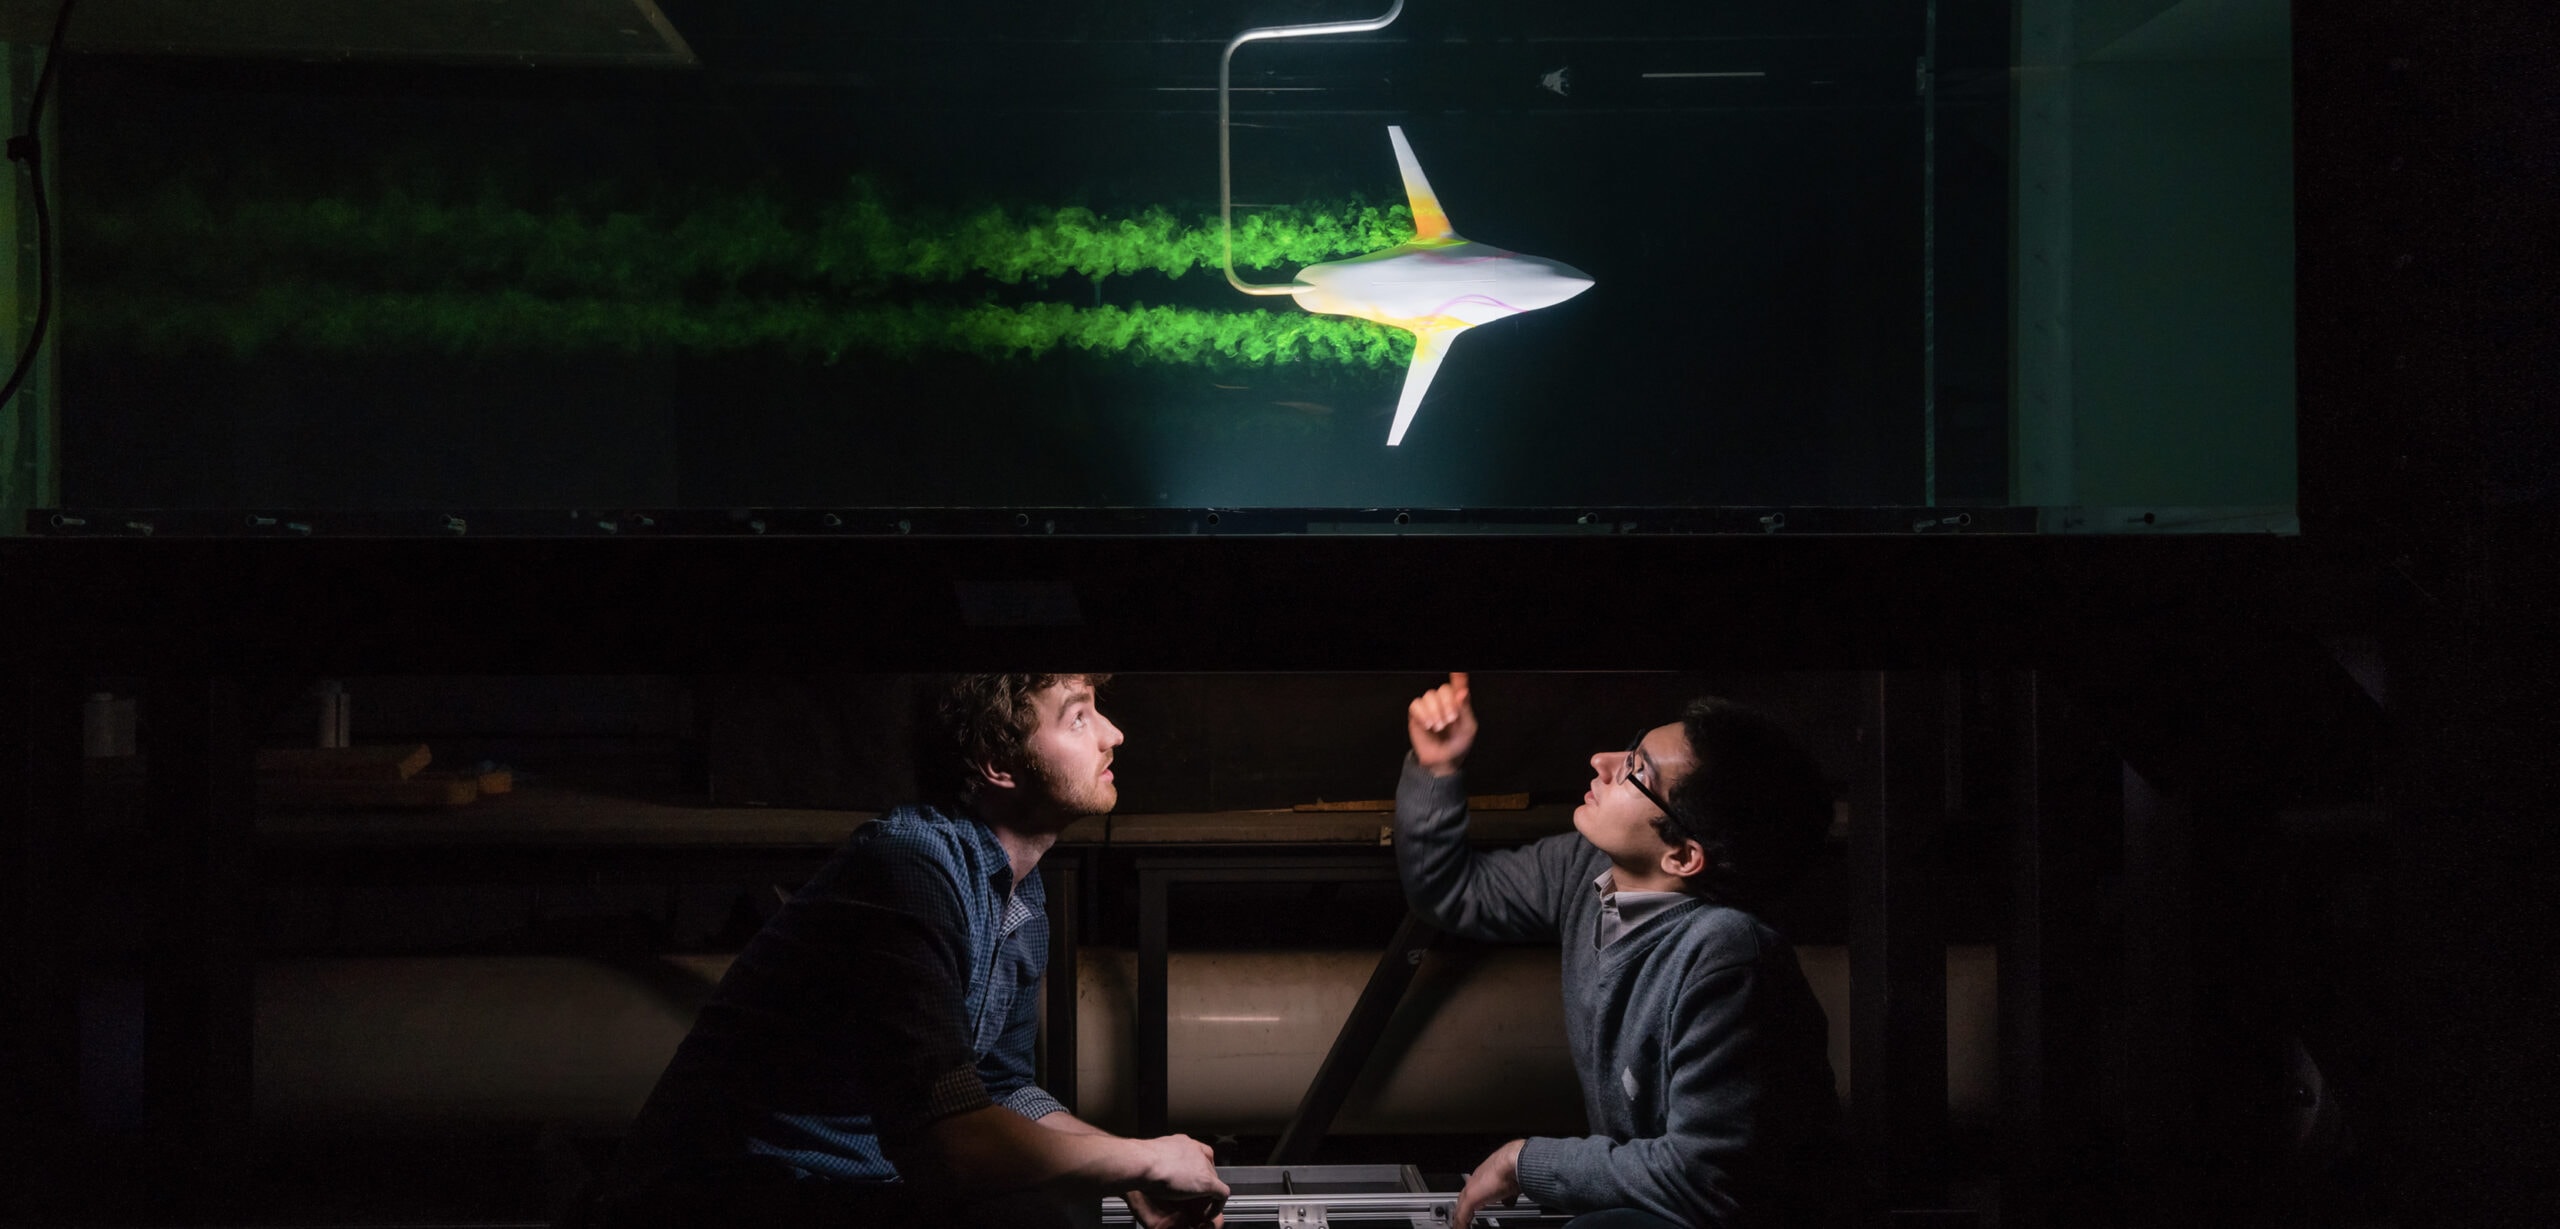 In a darkened lab, two men look up at a tank, where an airplane-shaped object leaves bright, turbulent vapour trails.